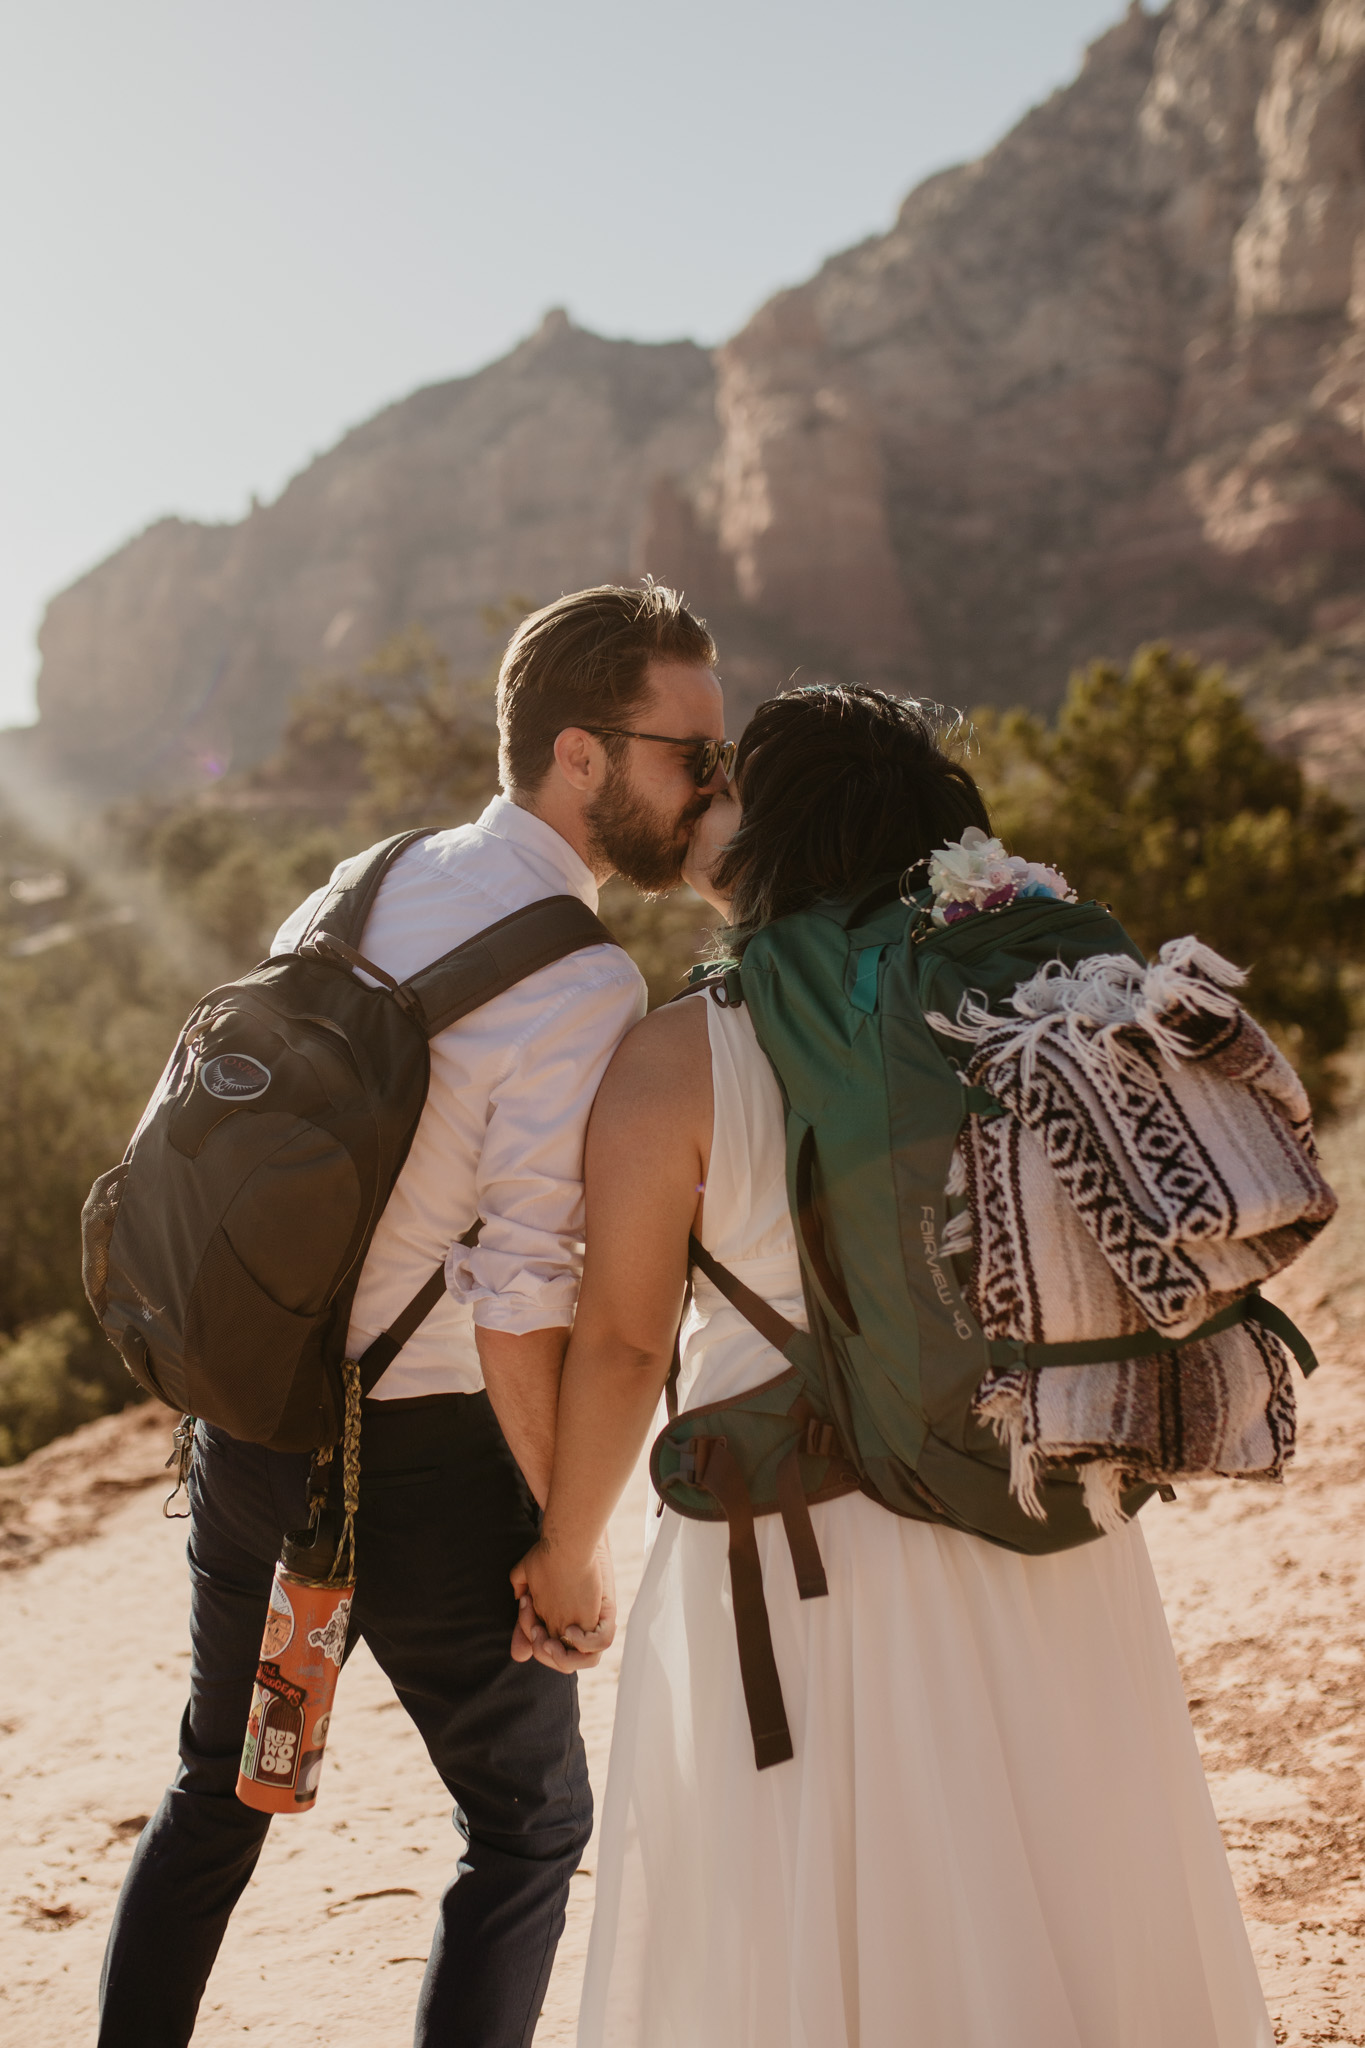 An adventurous Sedona elopement - hiking in the red rocks